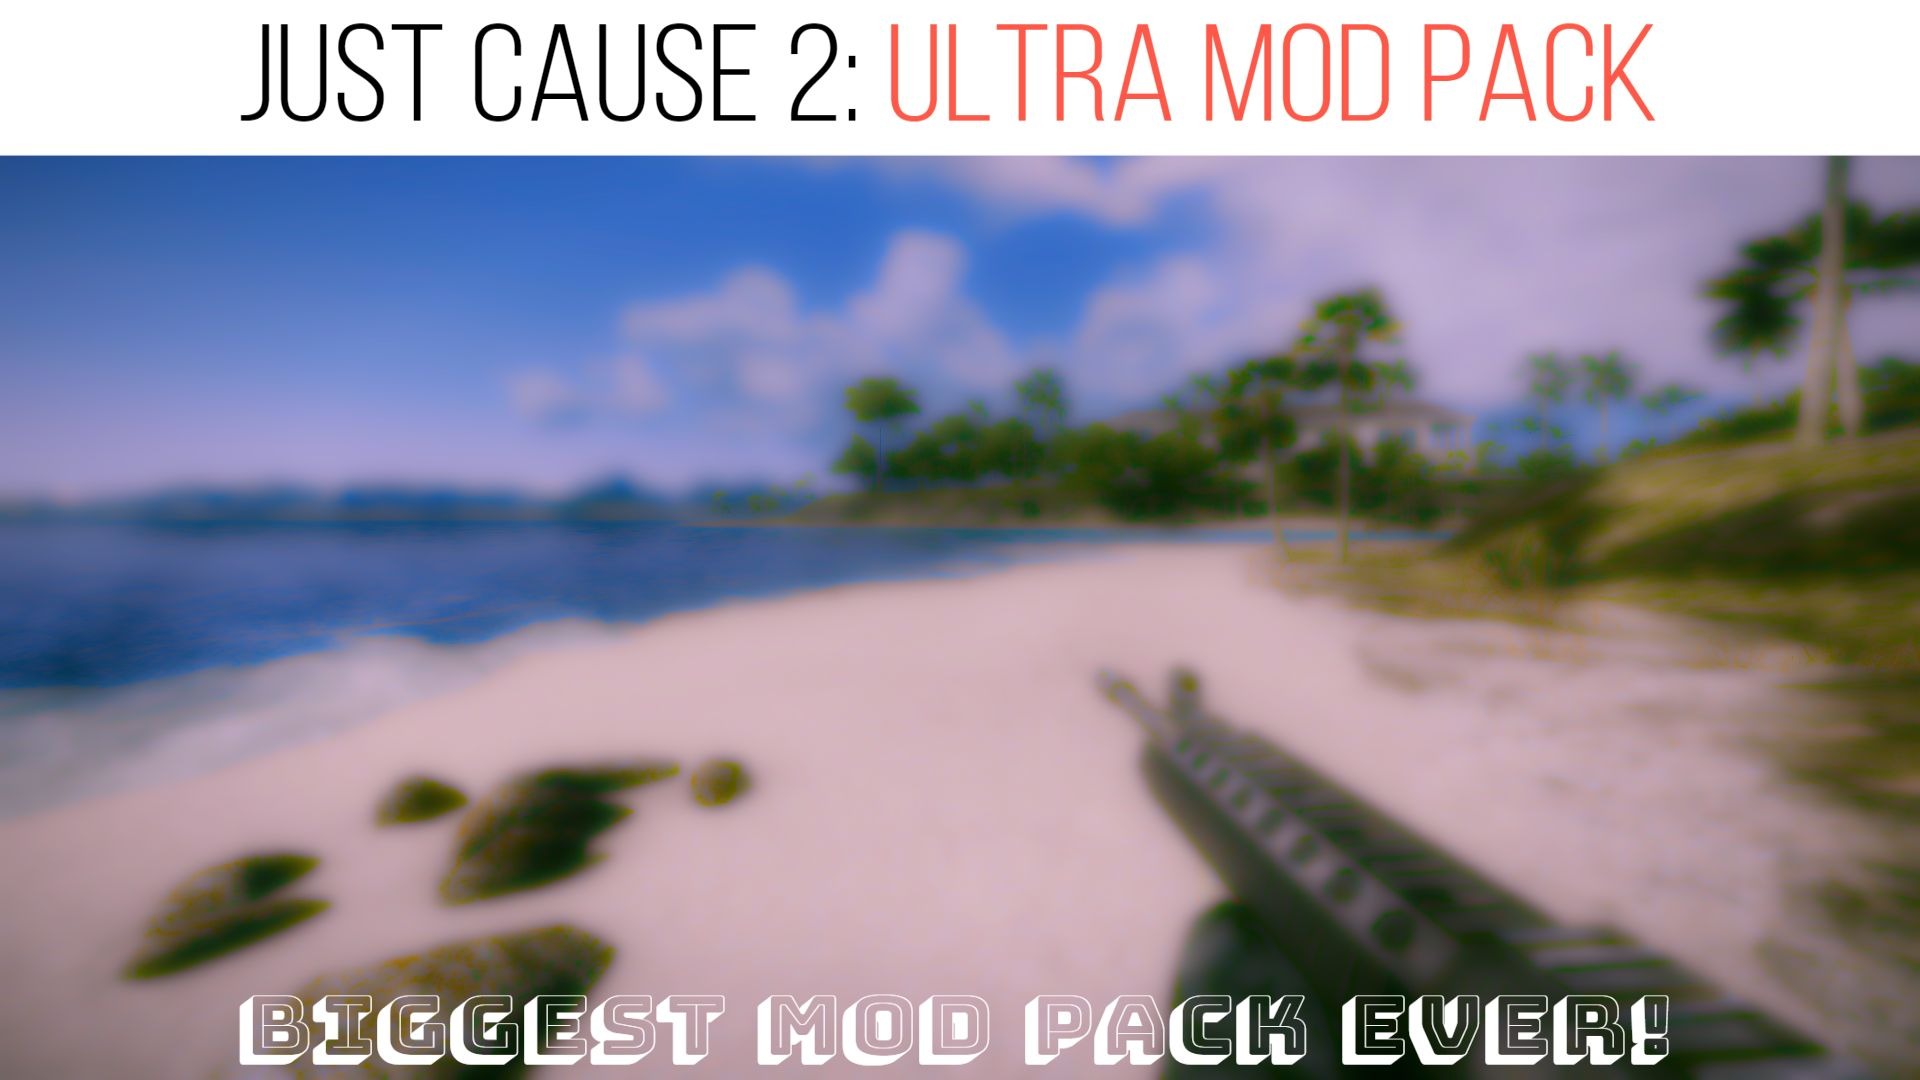 Just Cause 2 – Ultimate Modpack